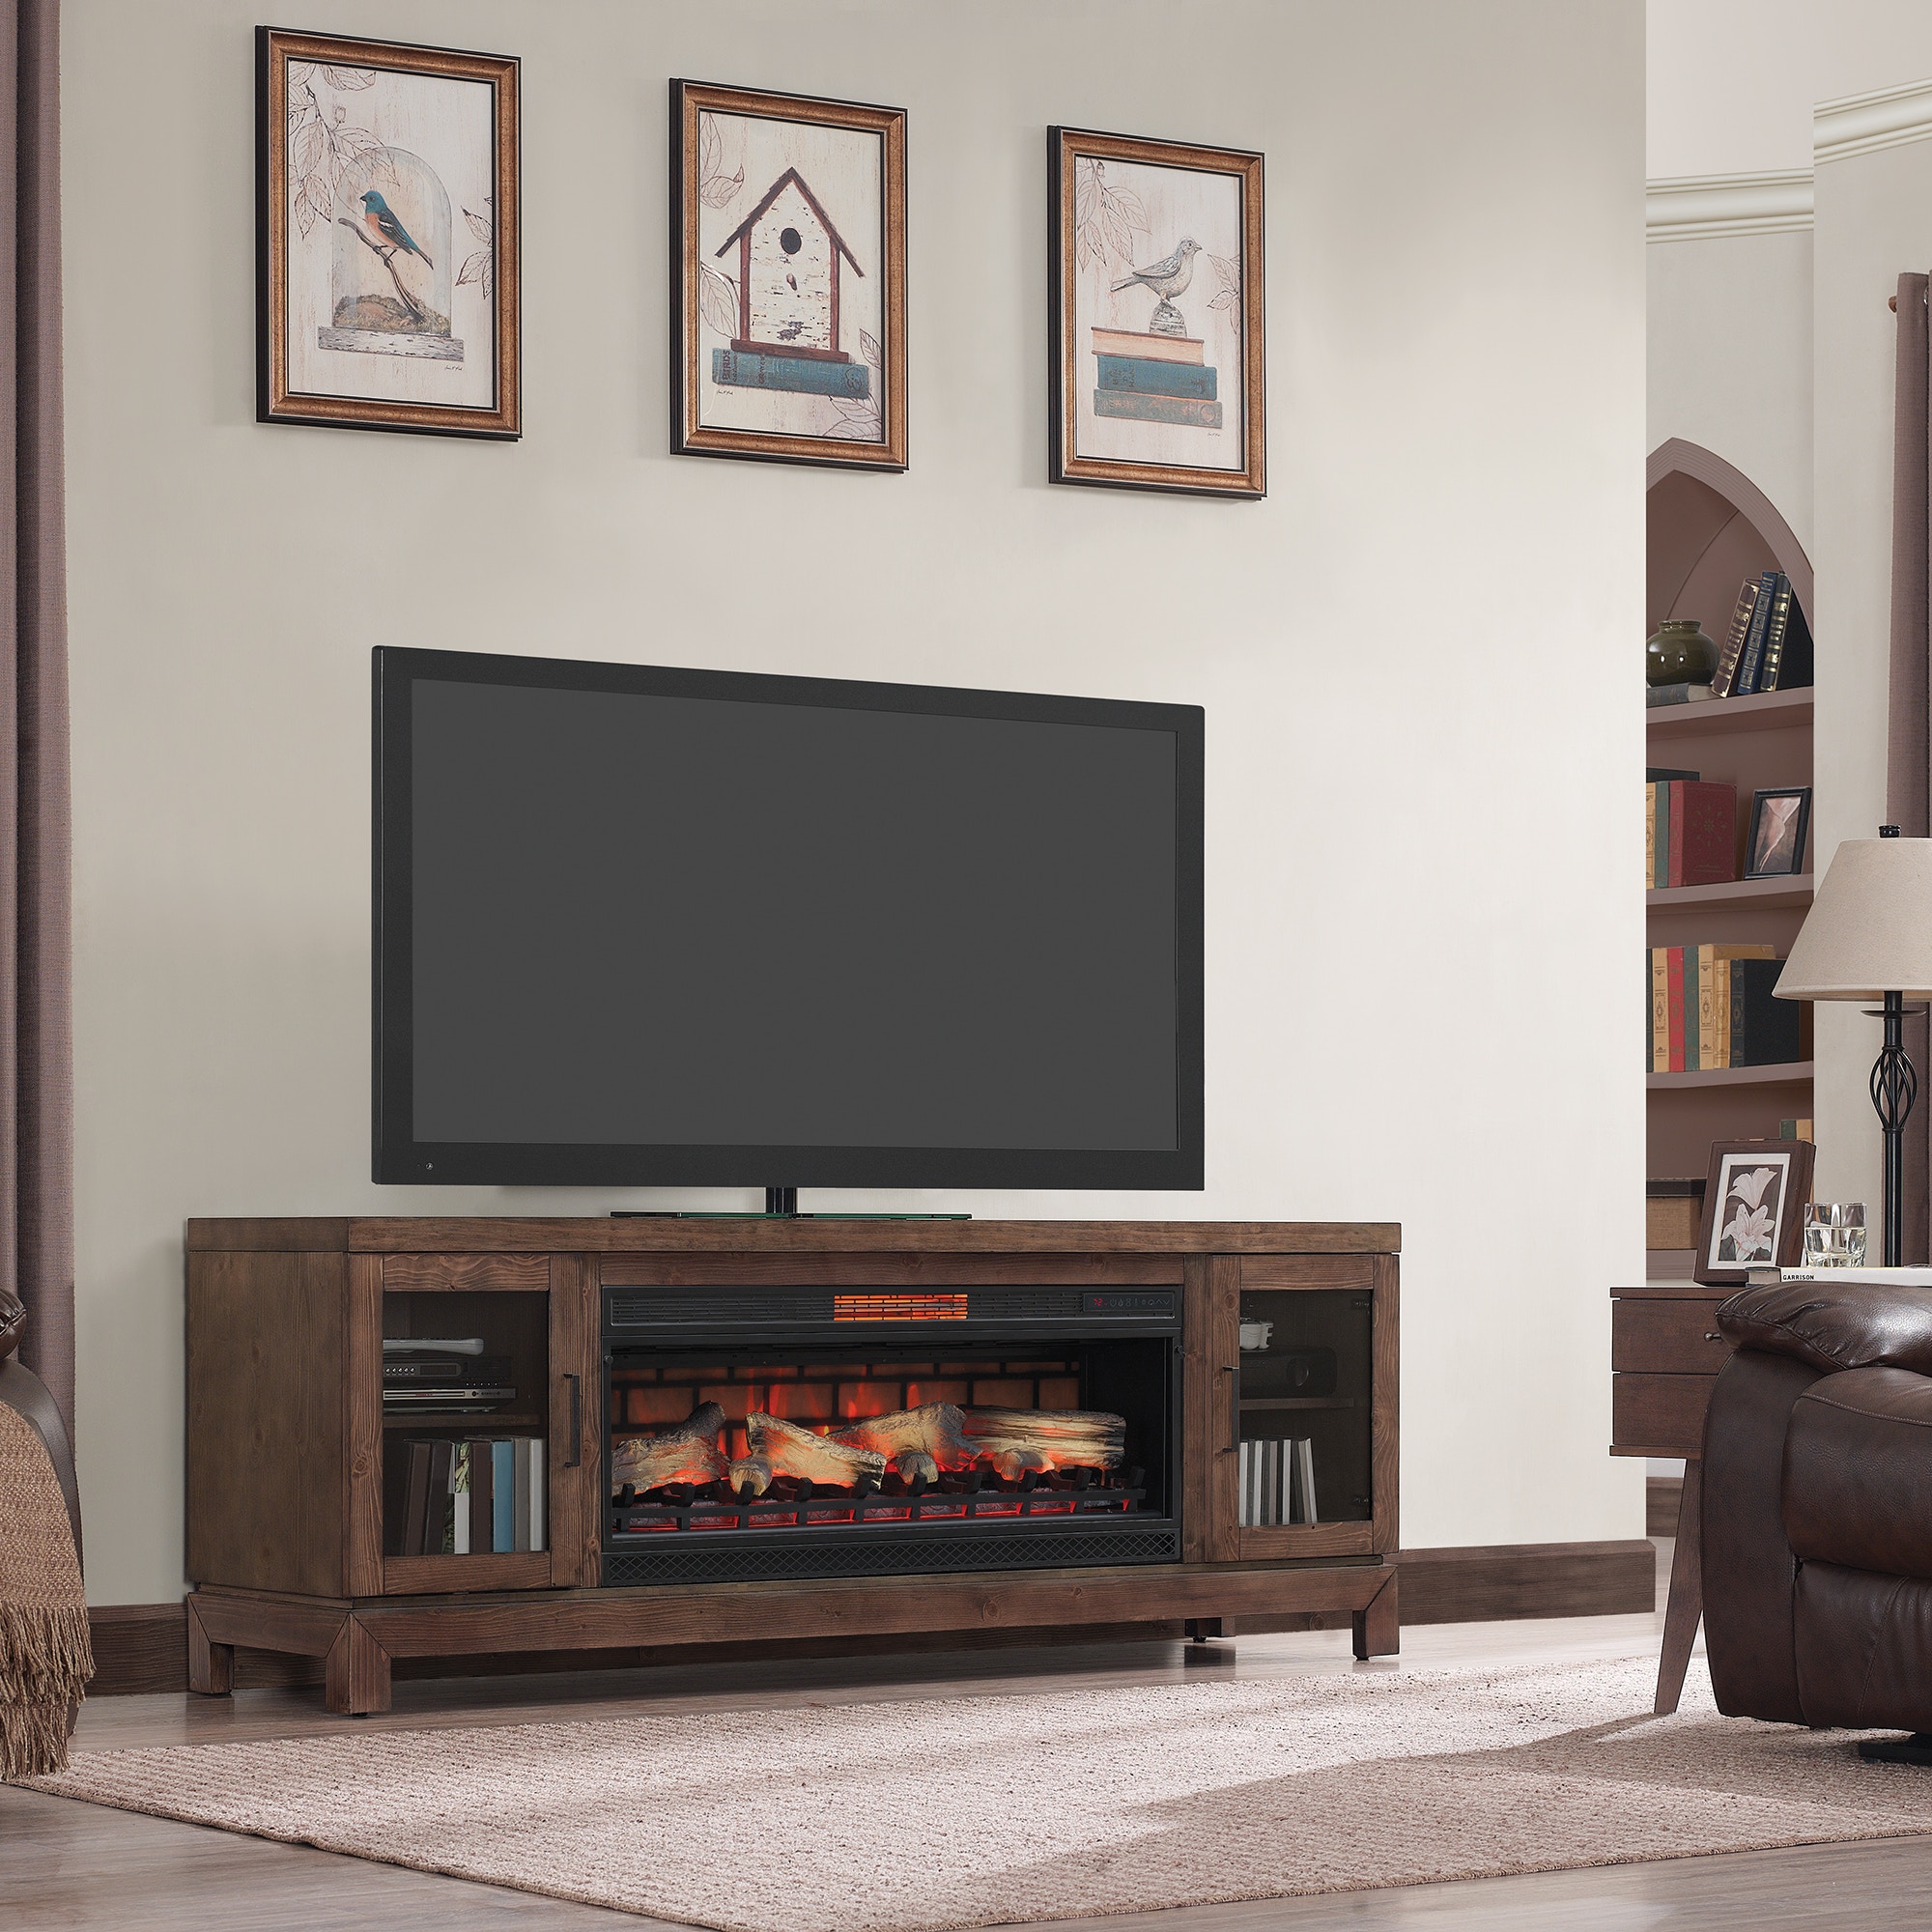 Classic Flame Home Entertainment Berkeley TV Stand for TVs up to